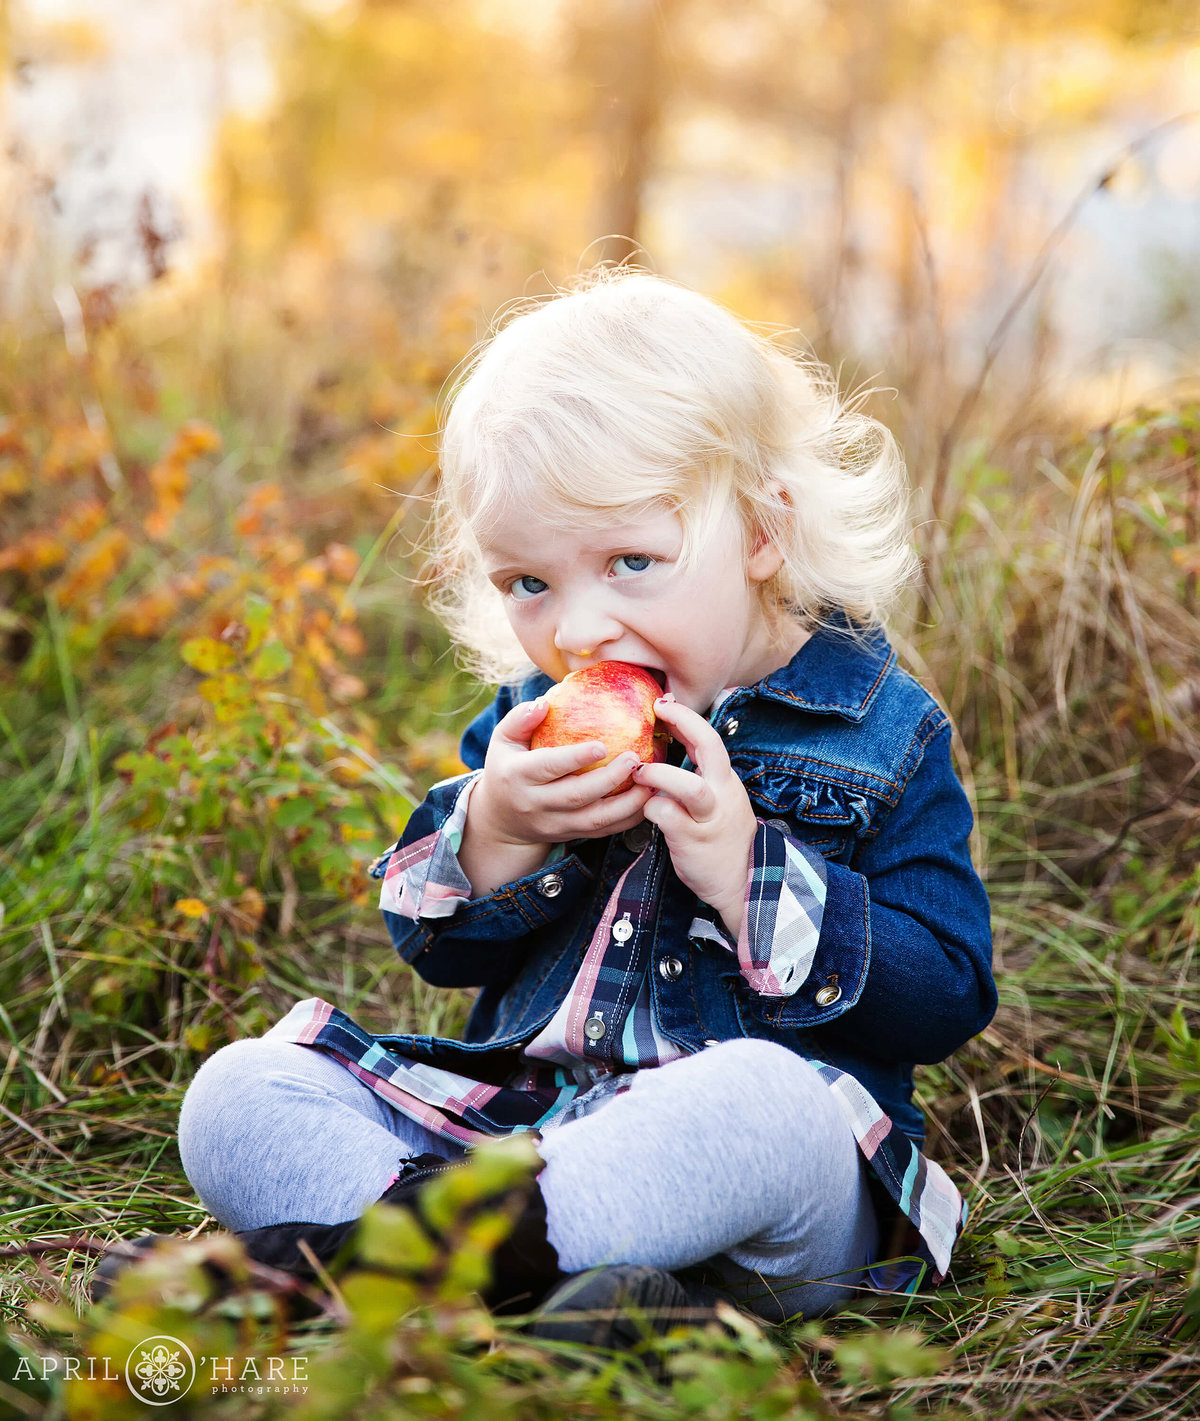 Cute Children's Photography During Fall in Boulder Colorado